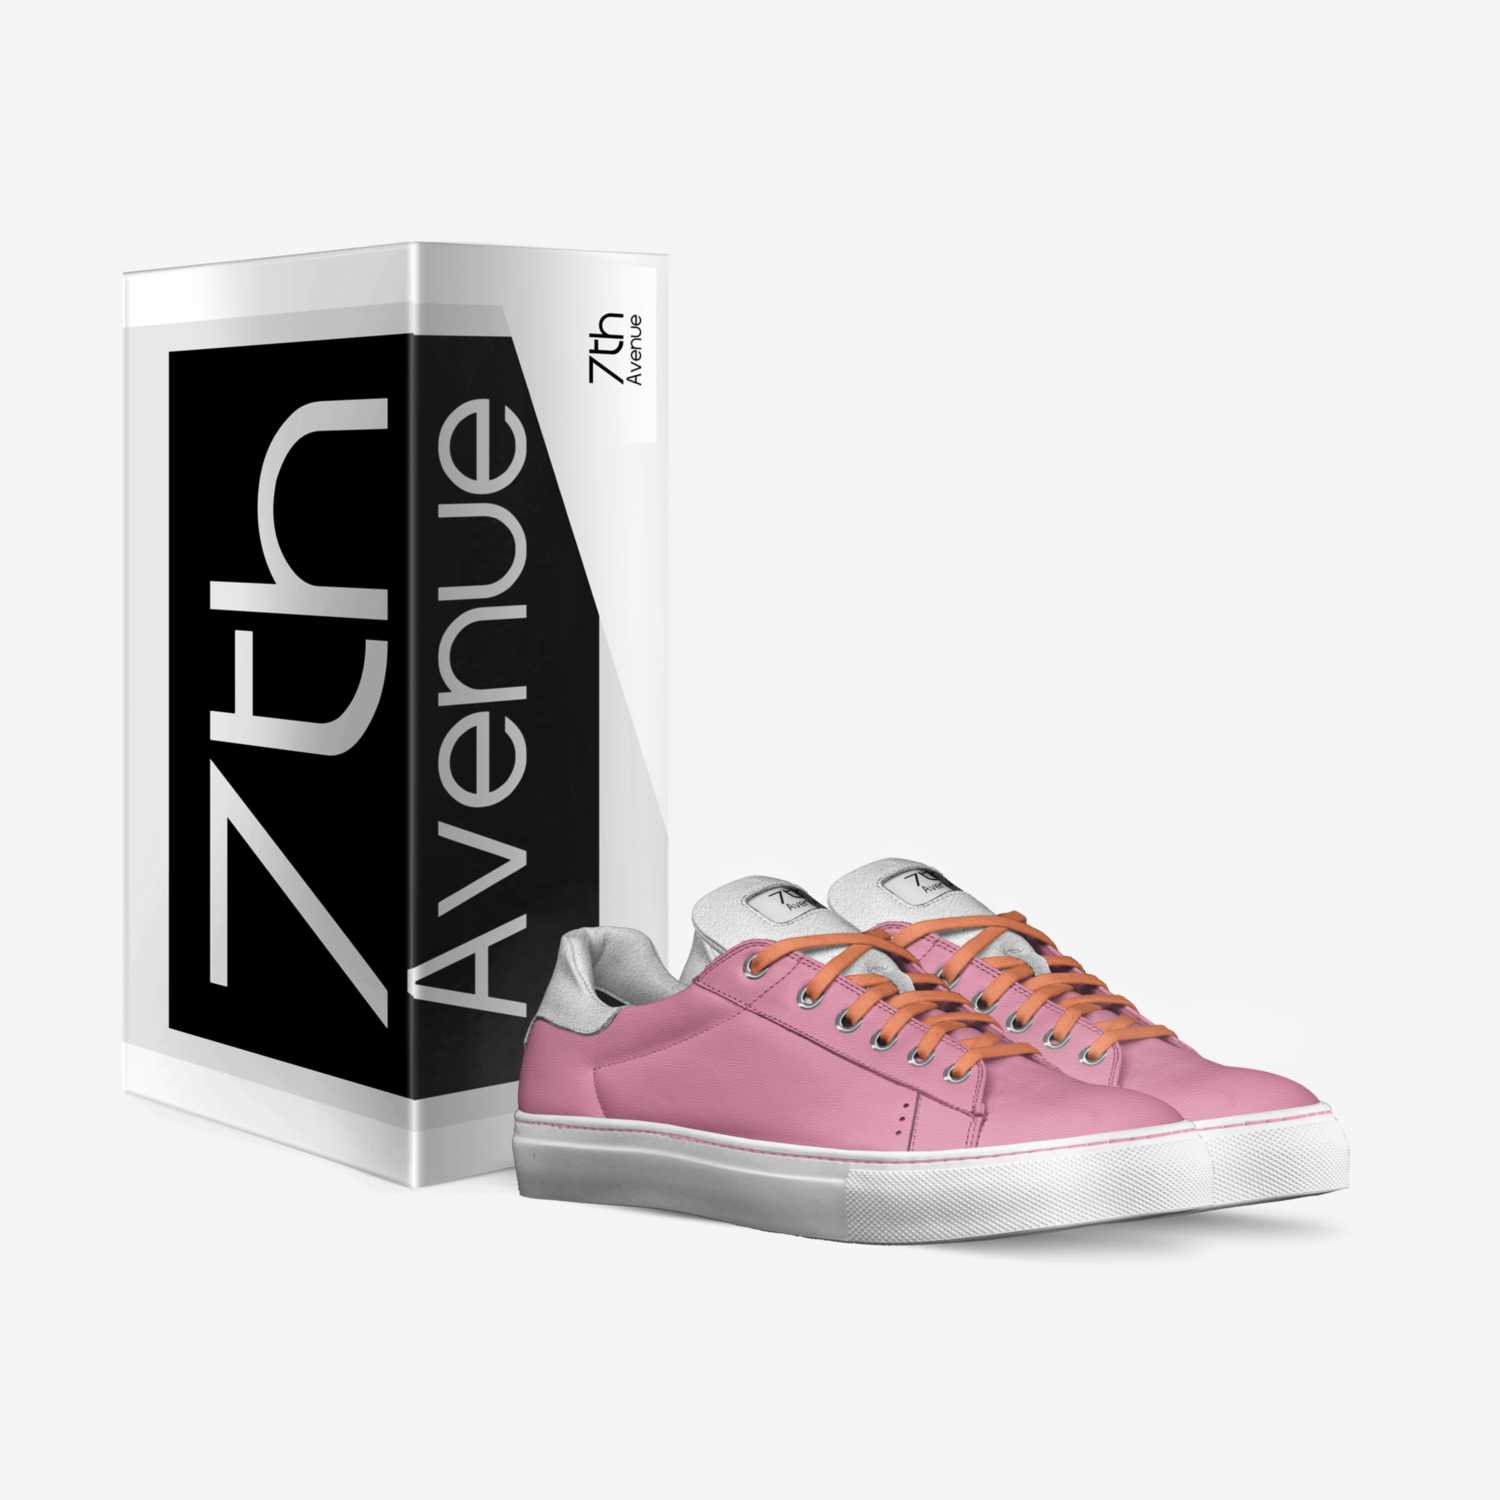 7th Avenue custom made in Italy shoes by Just Sneakerz | Box view